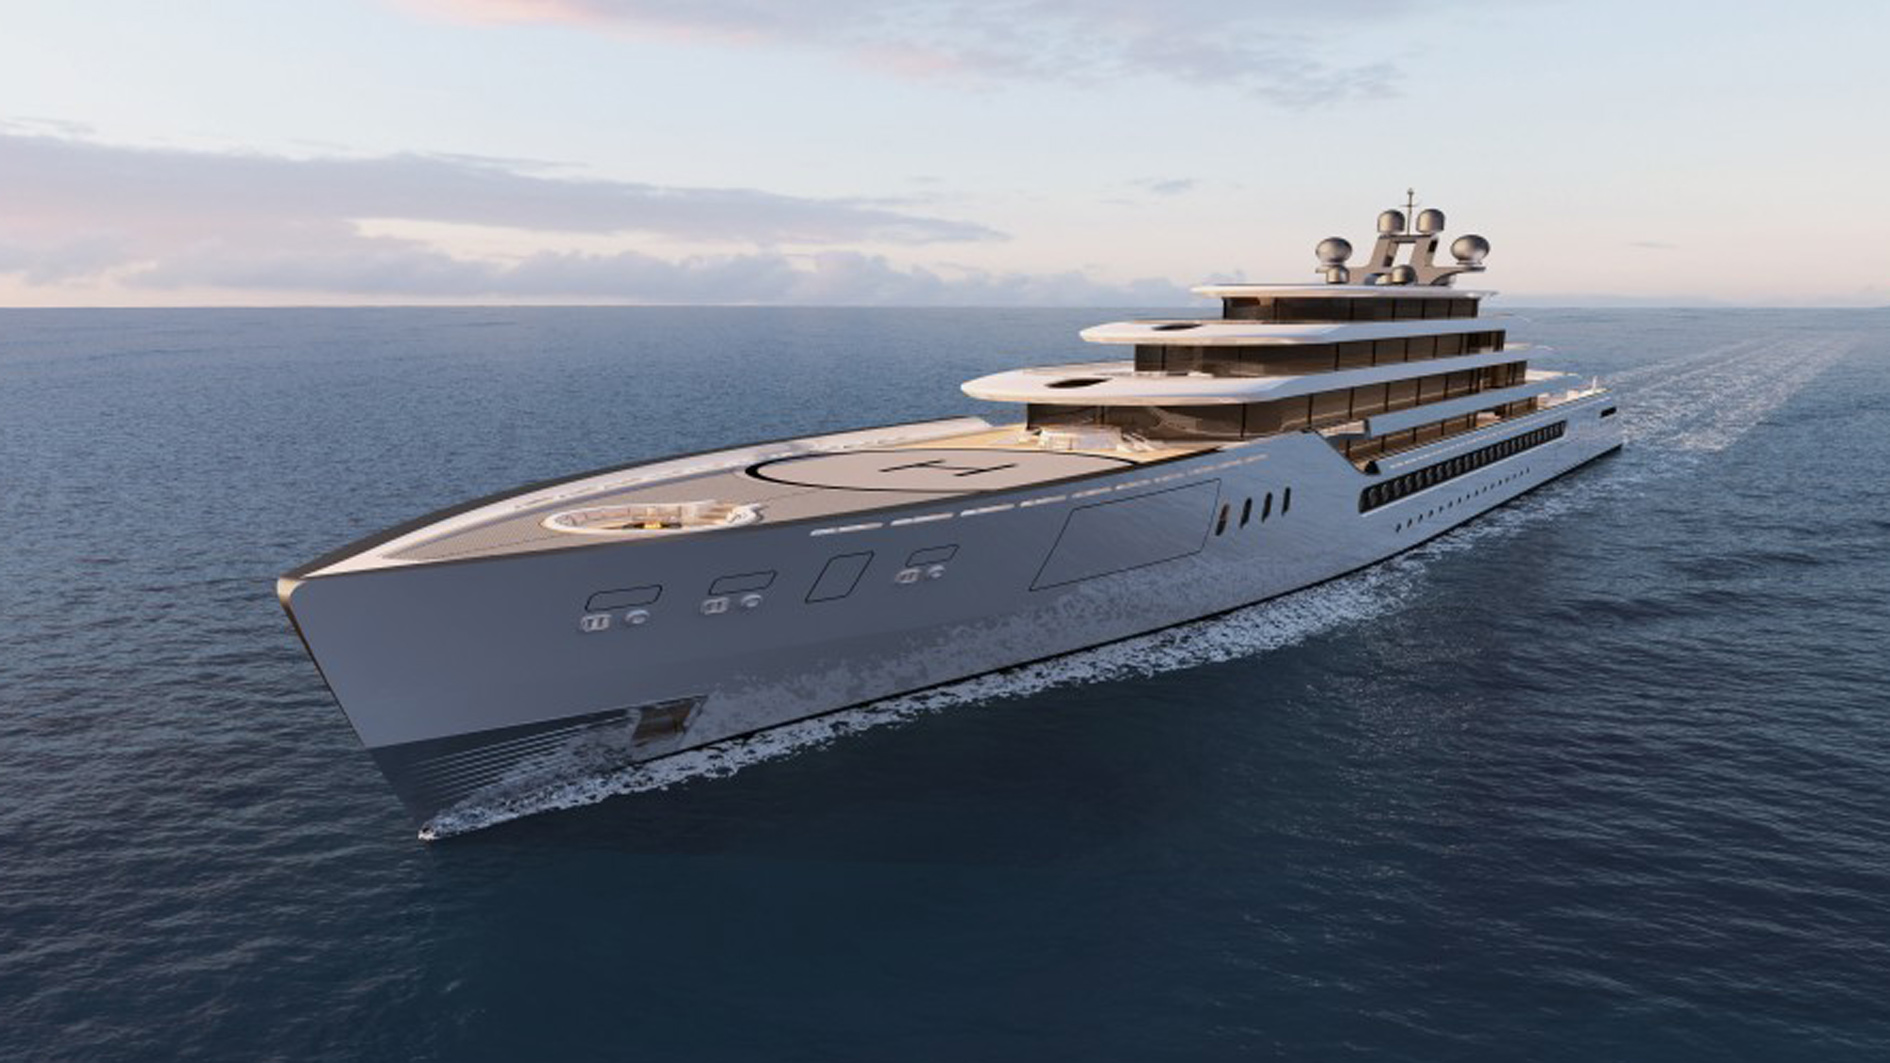 ></center></p><p>ONE 50: 150m yacht concept with fuel cells and battery system (Source: Meyer Werft)</p><p>M eyer Werft, Papenburg, announced a new design concept for a mega yacht as a move into new markets. The yard is a specialist is cruise ship construction, a sector hit by the corona pandemic.</p><p>At the Monaco Yacht Show, Meyer Werft, under the under the Meyer Yachts brand, for the first time displays a concept for a superyacht entirely powered by fuel cells and batteries, named ONE 50.</p><p>“We are currently seeing that the demand for mega yachts is increasing and there is room for another shipyard in this segment,